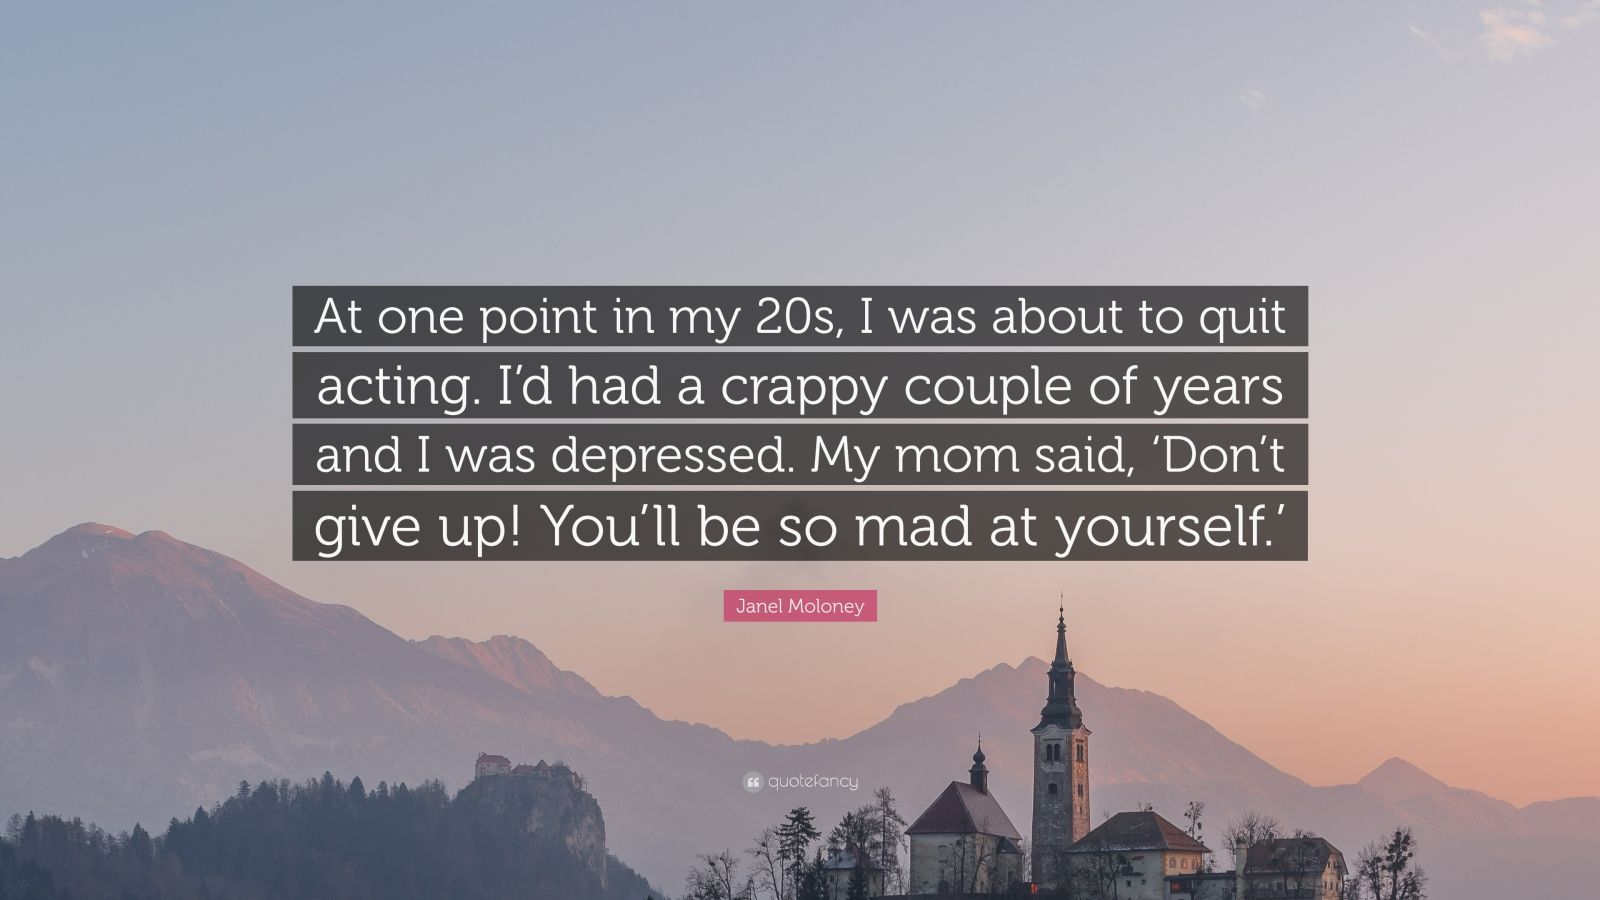 Janel Moloney Quote: “At one point in my 20s, I was about to quit